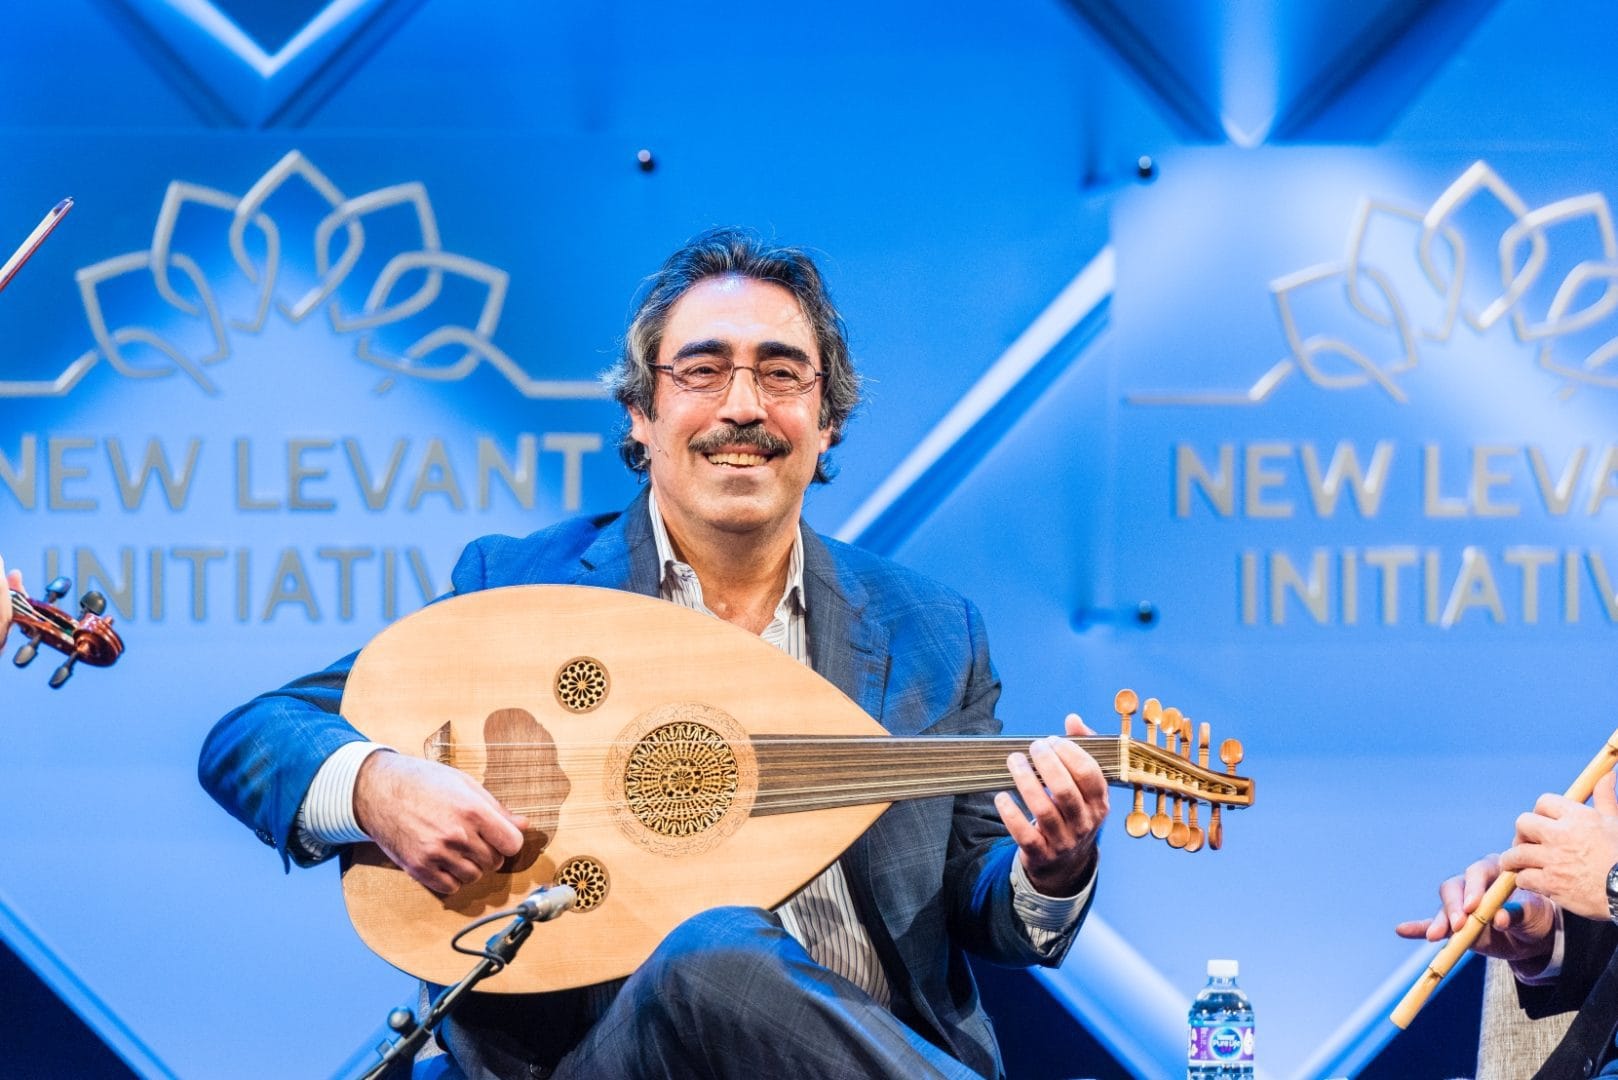 <h4>Sounds of the Levant</h4>
<p>Renown musician <a href="https://www.new-levant.org/person/simon-shaheen/">Simon Shaheen</a> moderates the panel and speaks about the exchange of music and music theory that began in Egypt and spread across the Levant.</p>
